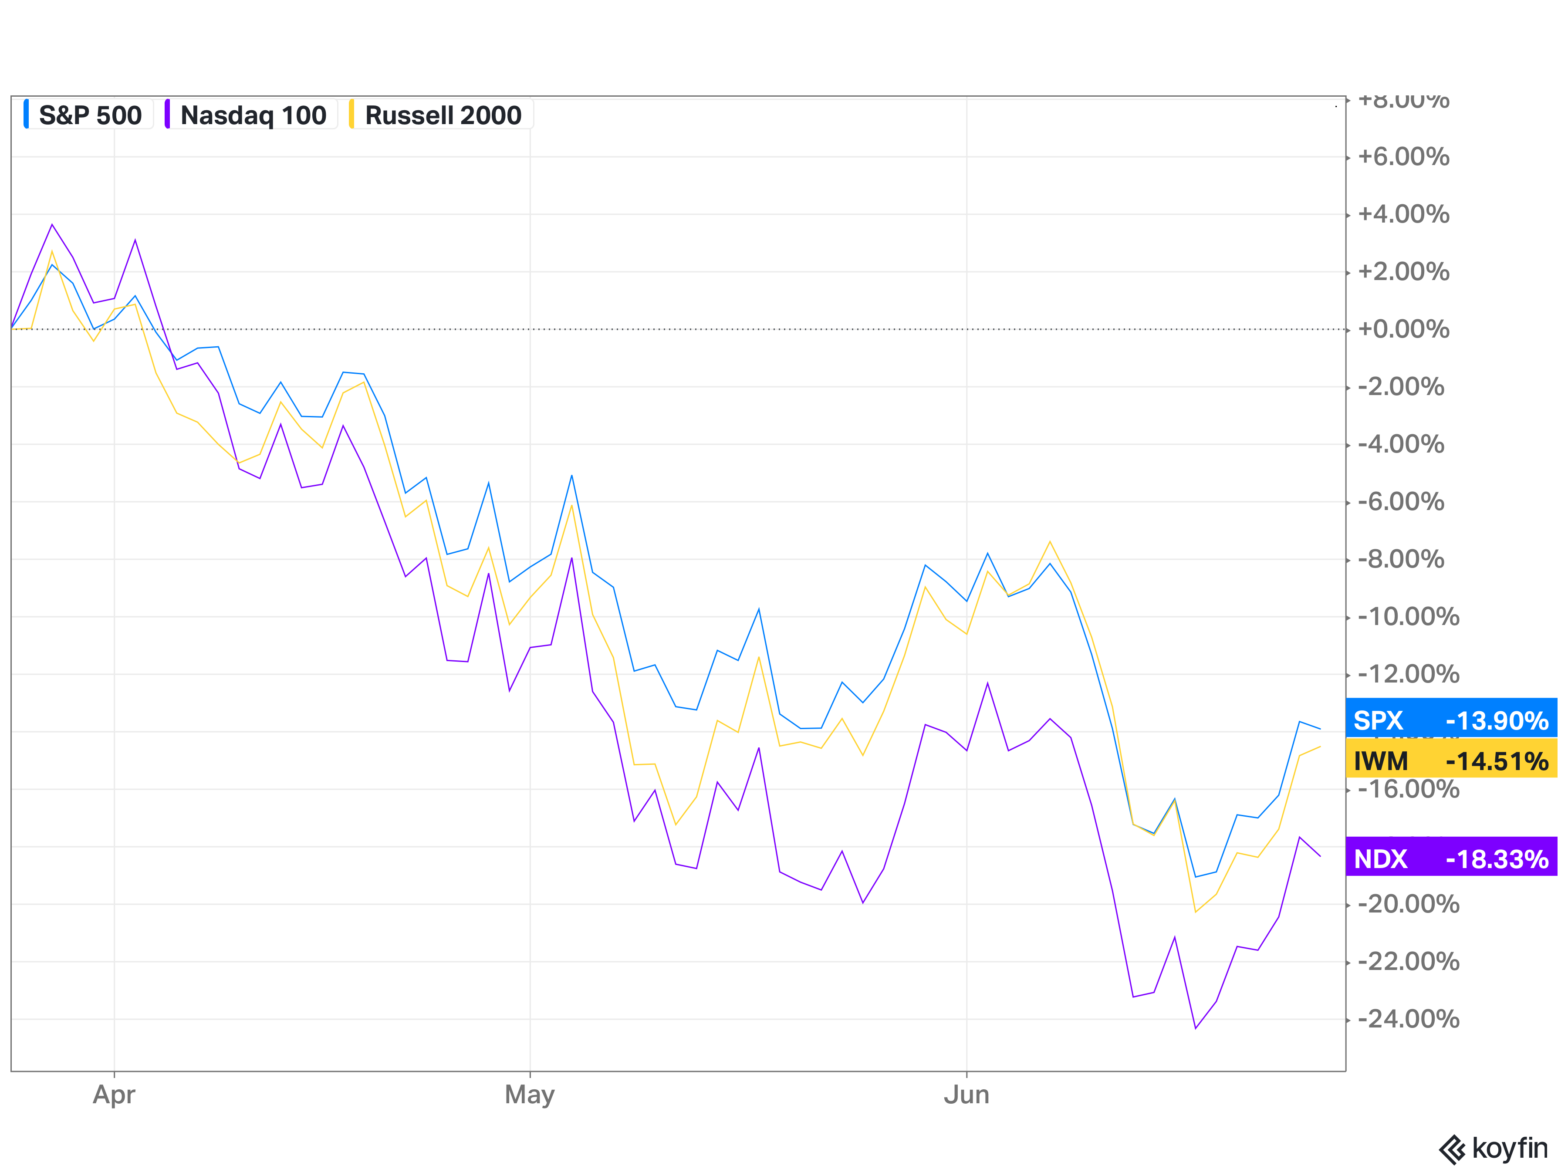 Three month chart of S&P 500, Nasdaq 100, and Russell 2000 showing falls of 13.9%, 18.33%, and 14.51% respectively.